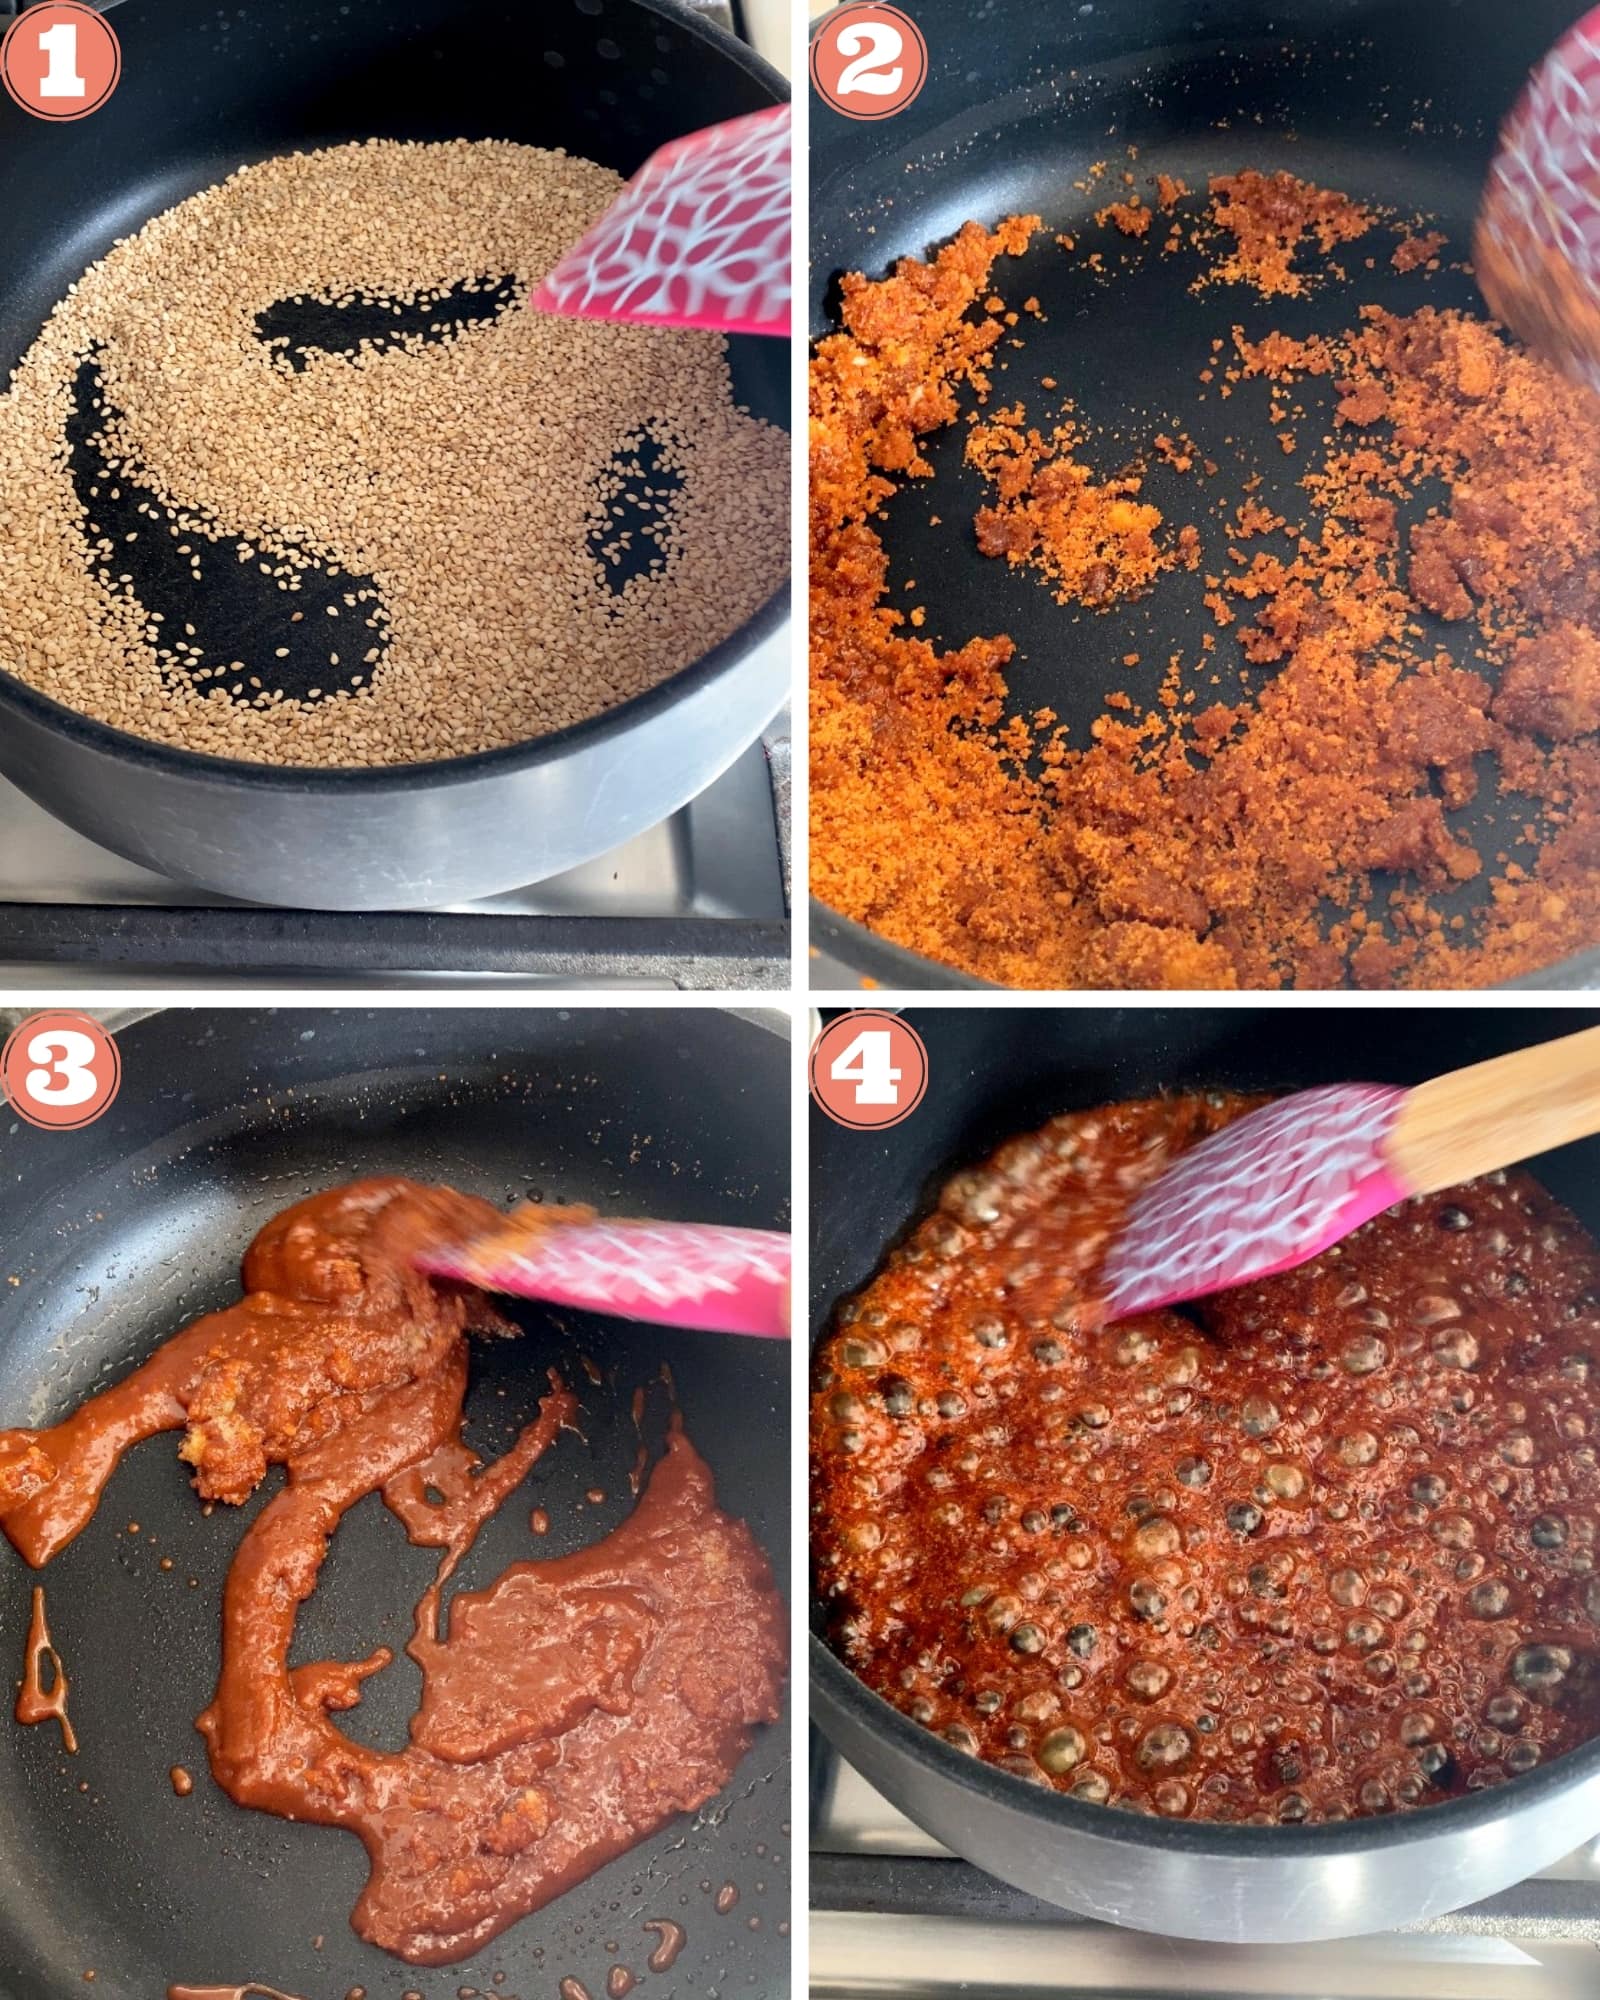 First four steps showing how to make til chikki in a pan